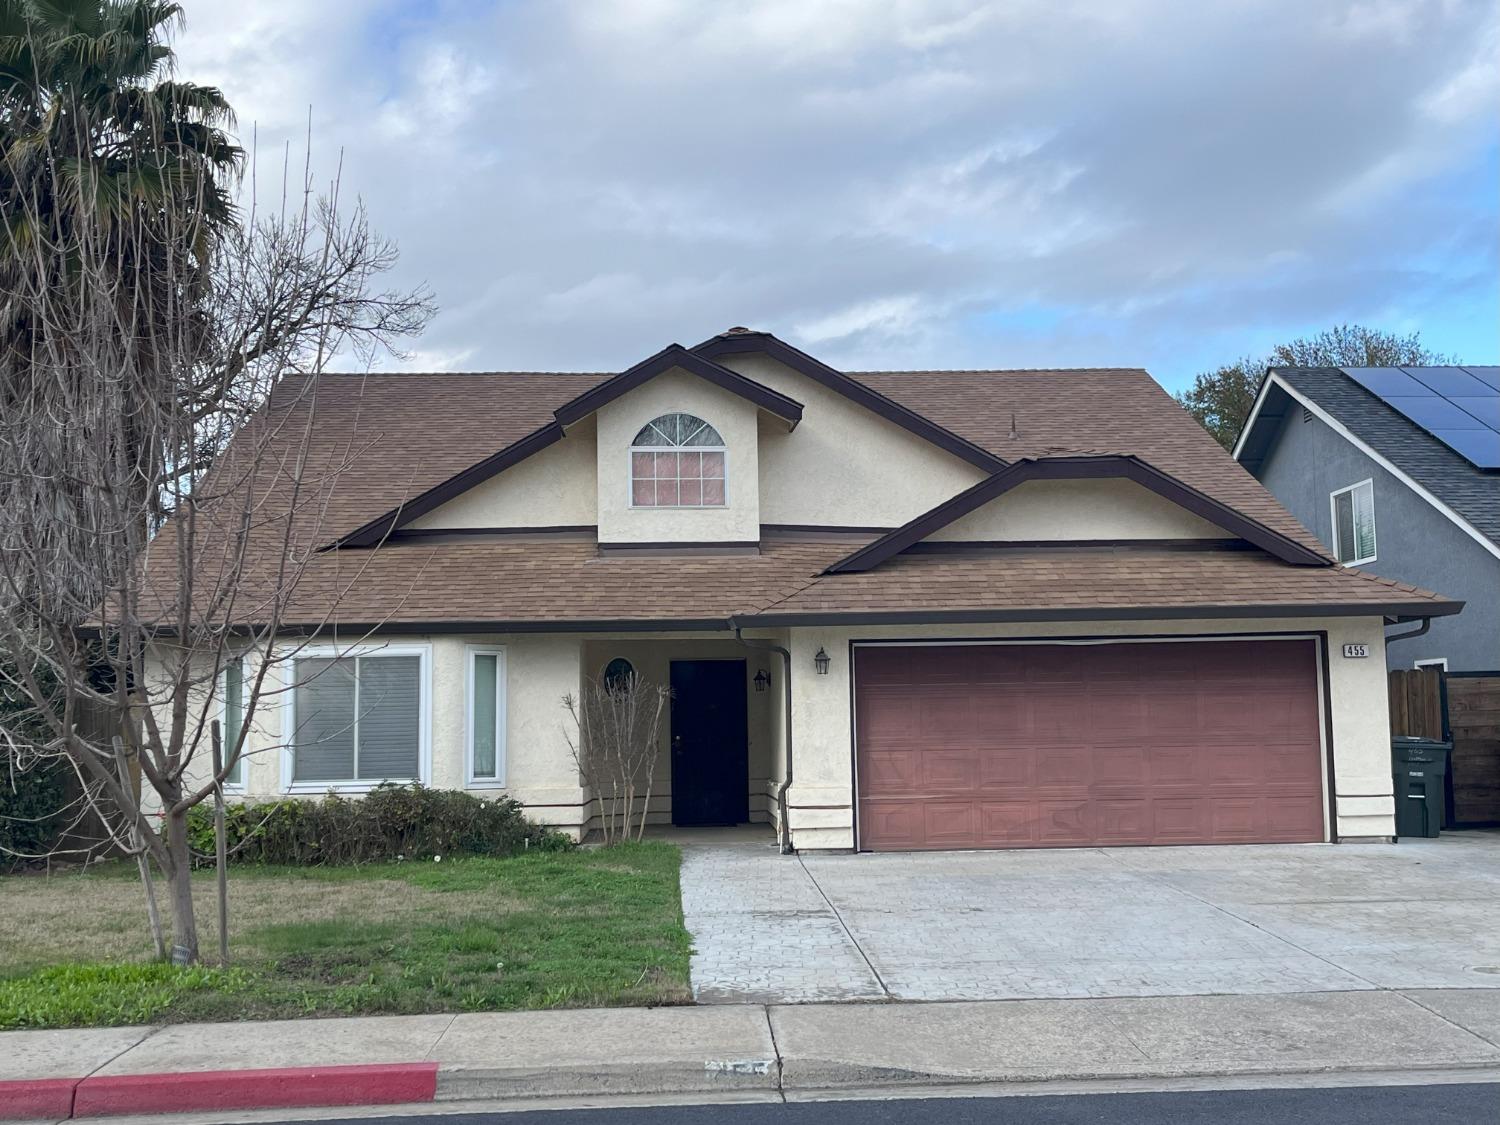 455 D Arpino Court, Patterson, CA 95363